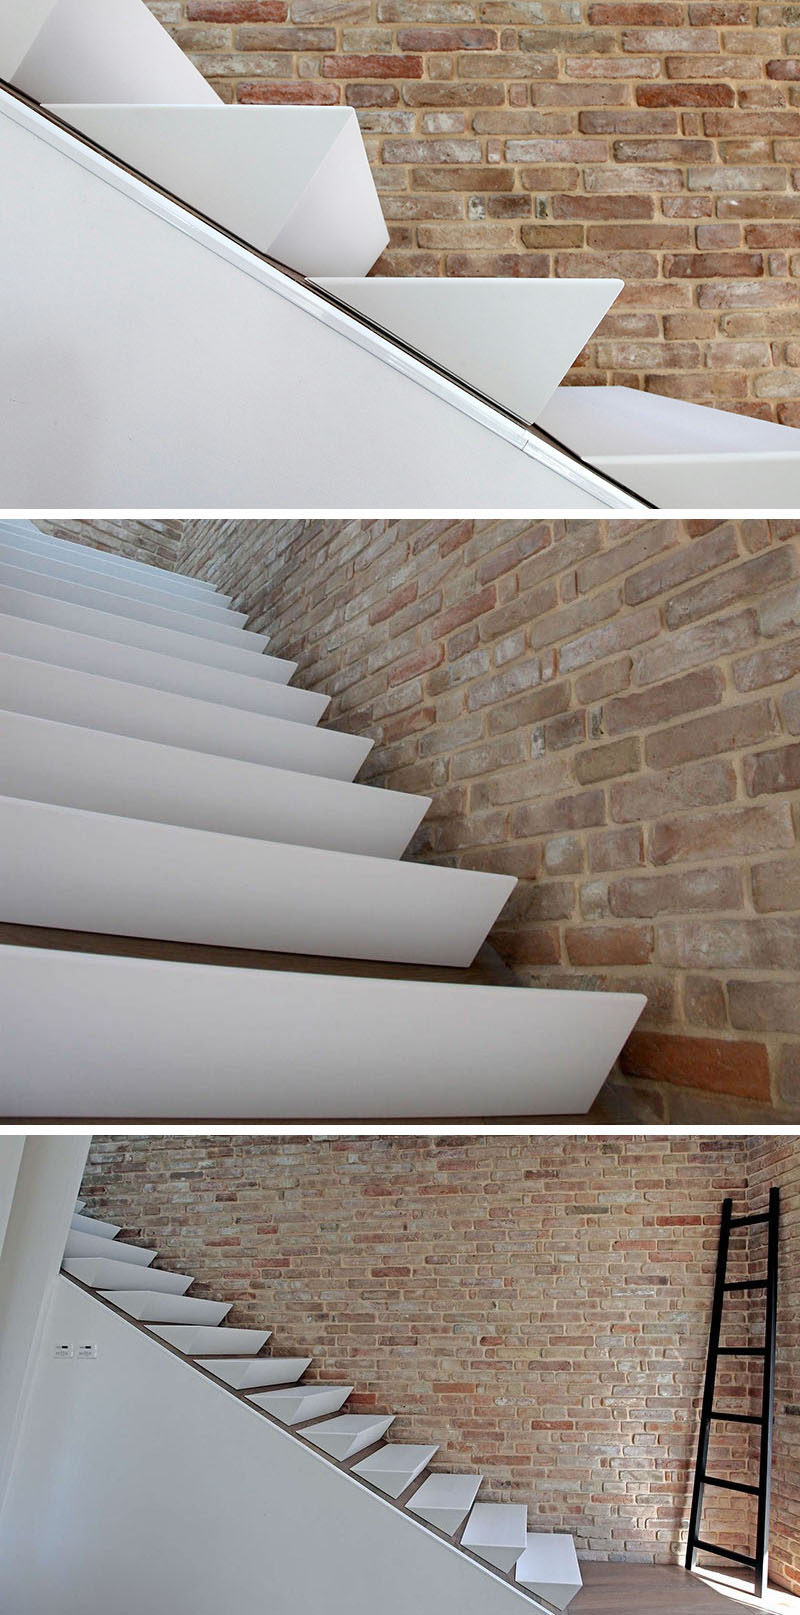 18 Examples Of Stair Details To Inspire You // These wedge-shaped stairs are made of white corian